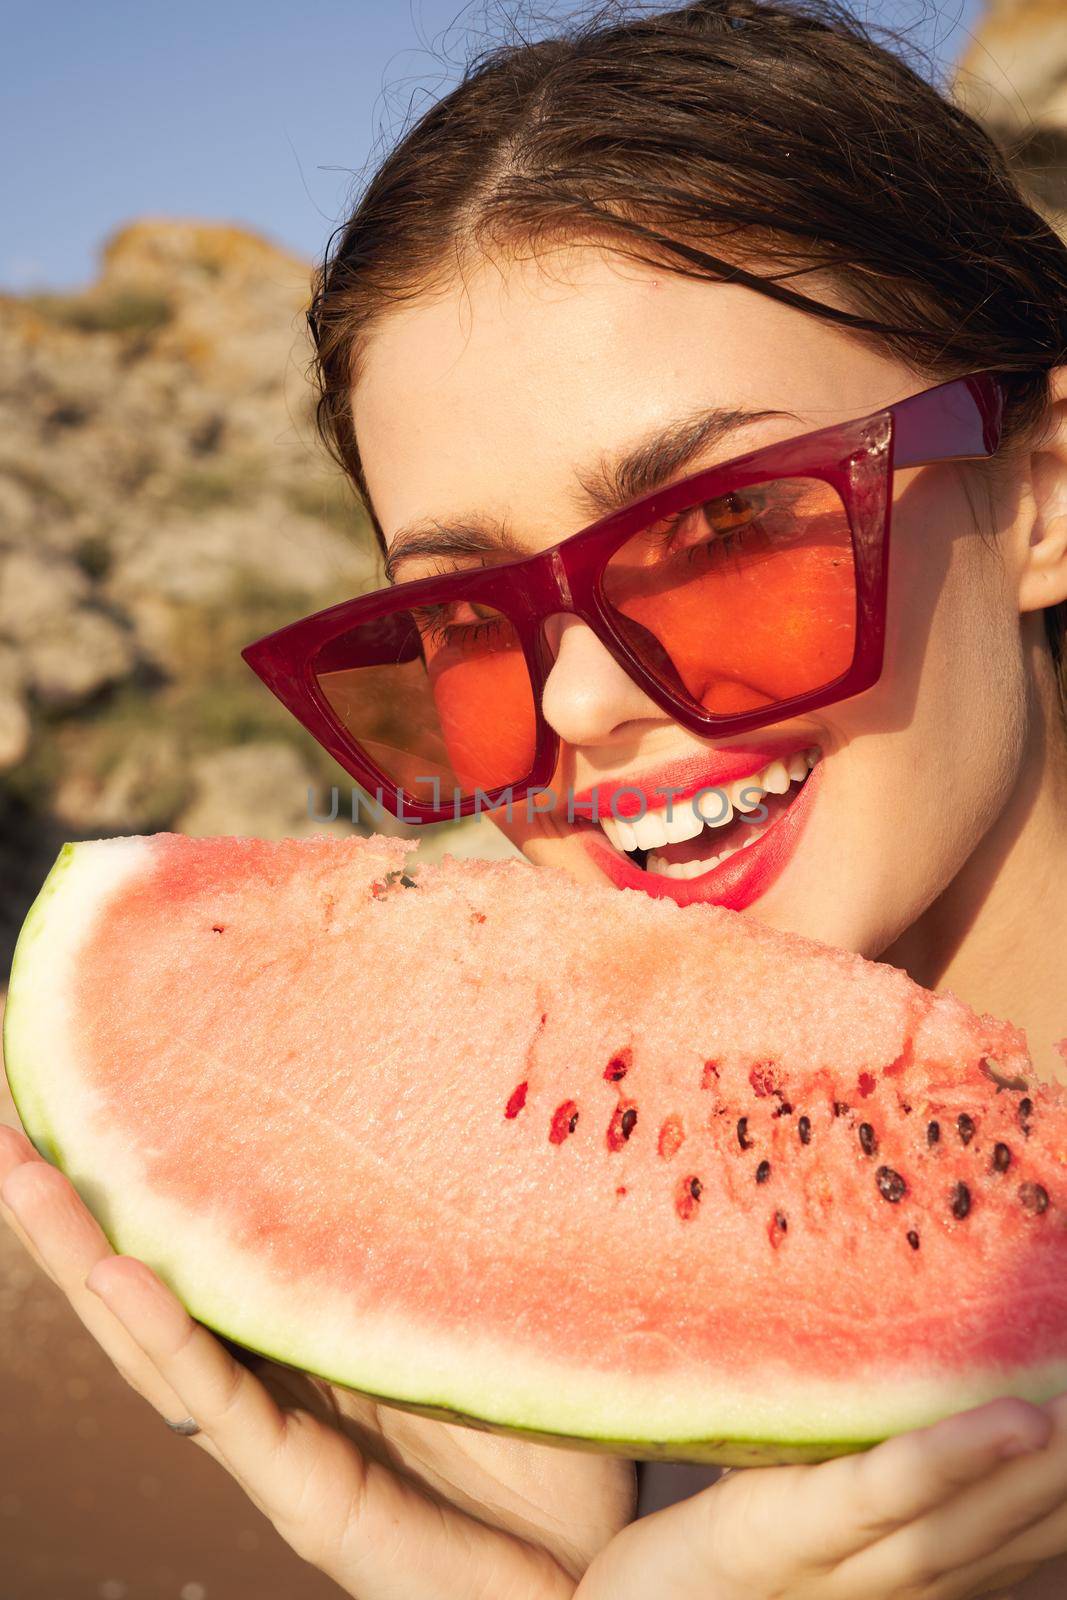 woman eating watermelon outdoors Sun summer close-up. High quality photo